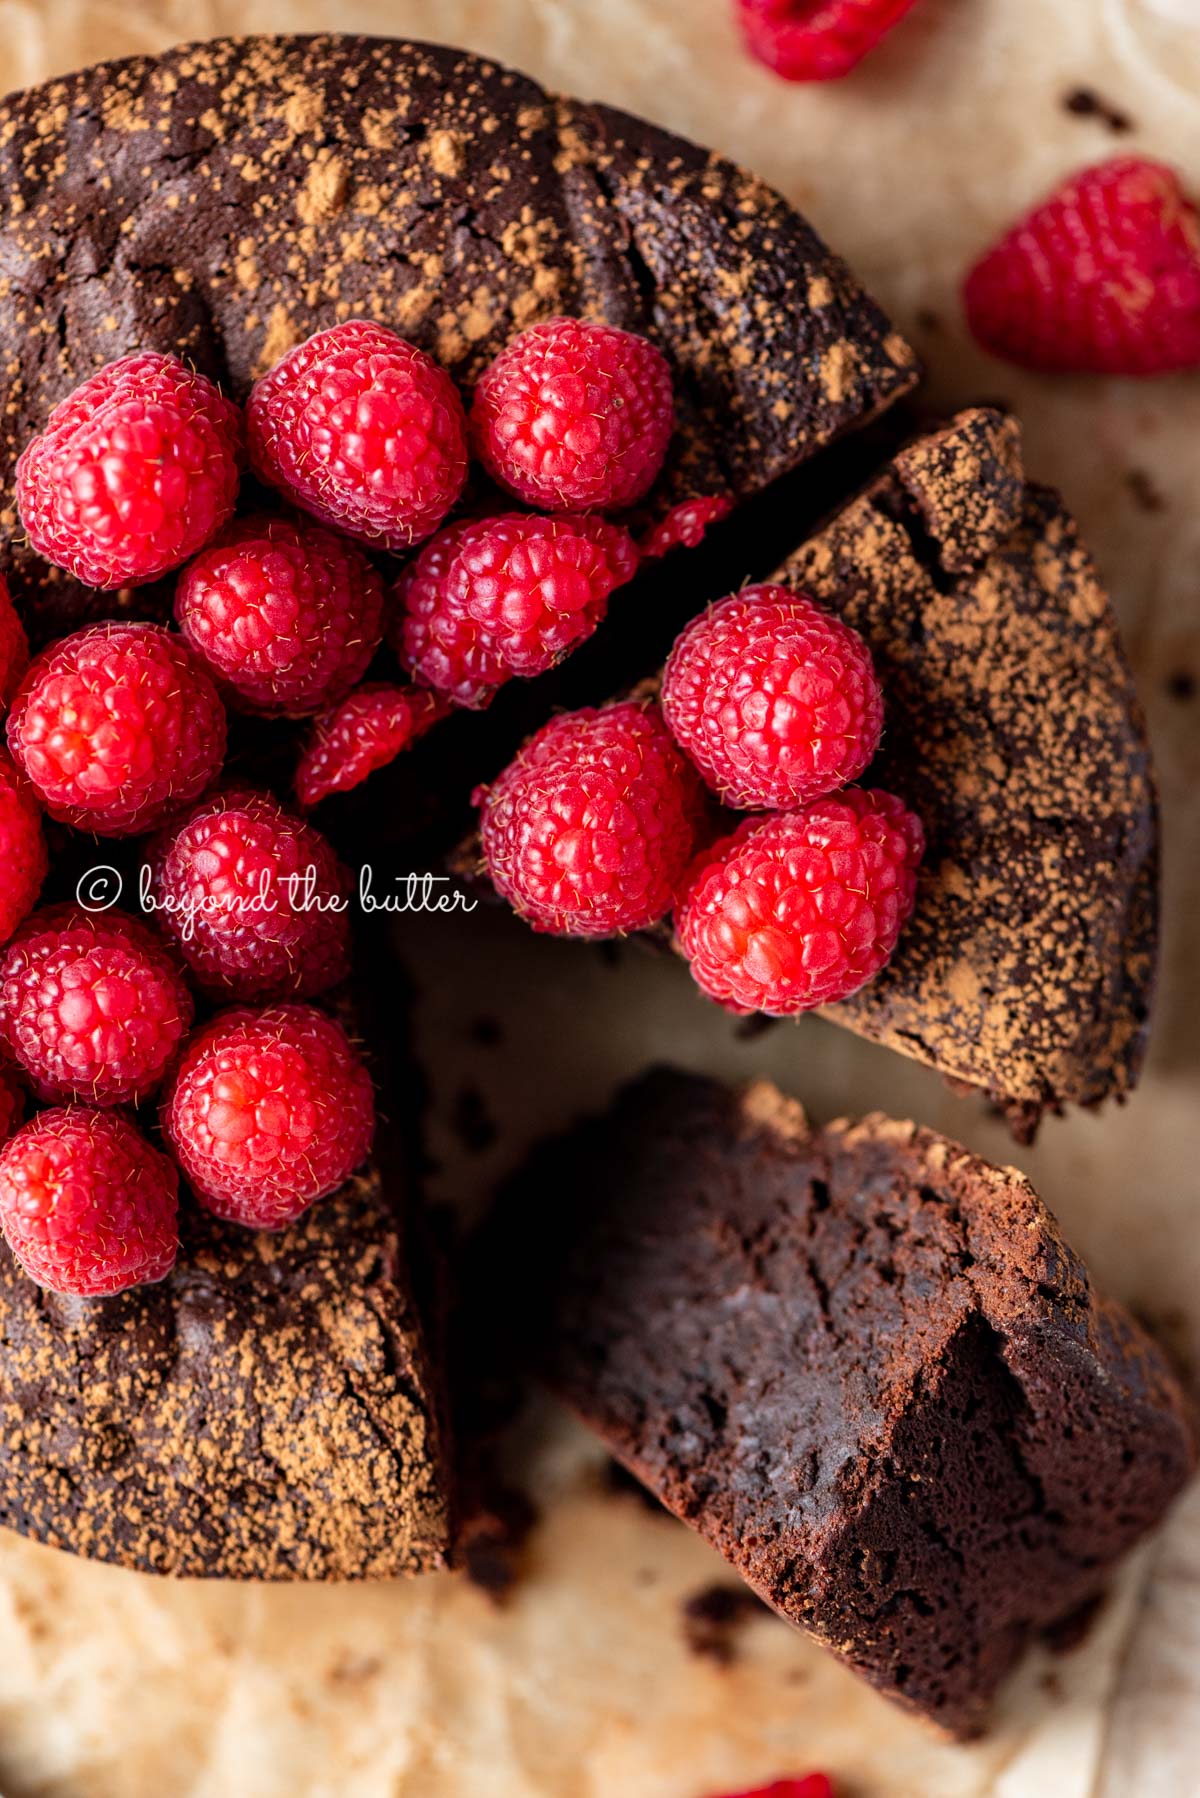 Sliced small flourless chocolate cake topped with cocoa powder and fresh raspberries on parchment paper | All images © Beyond the Butter®